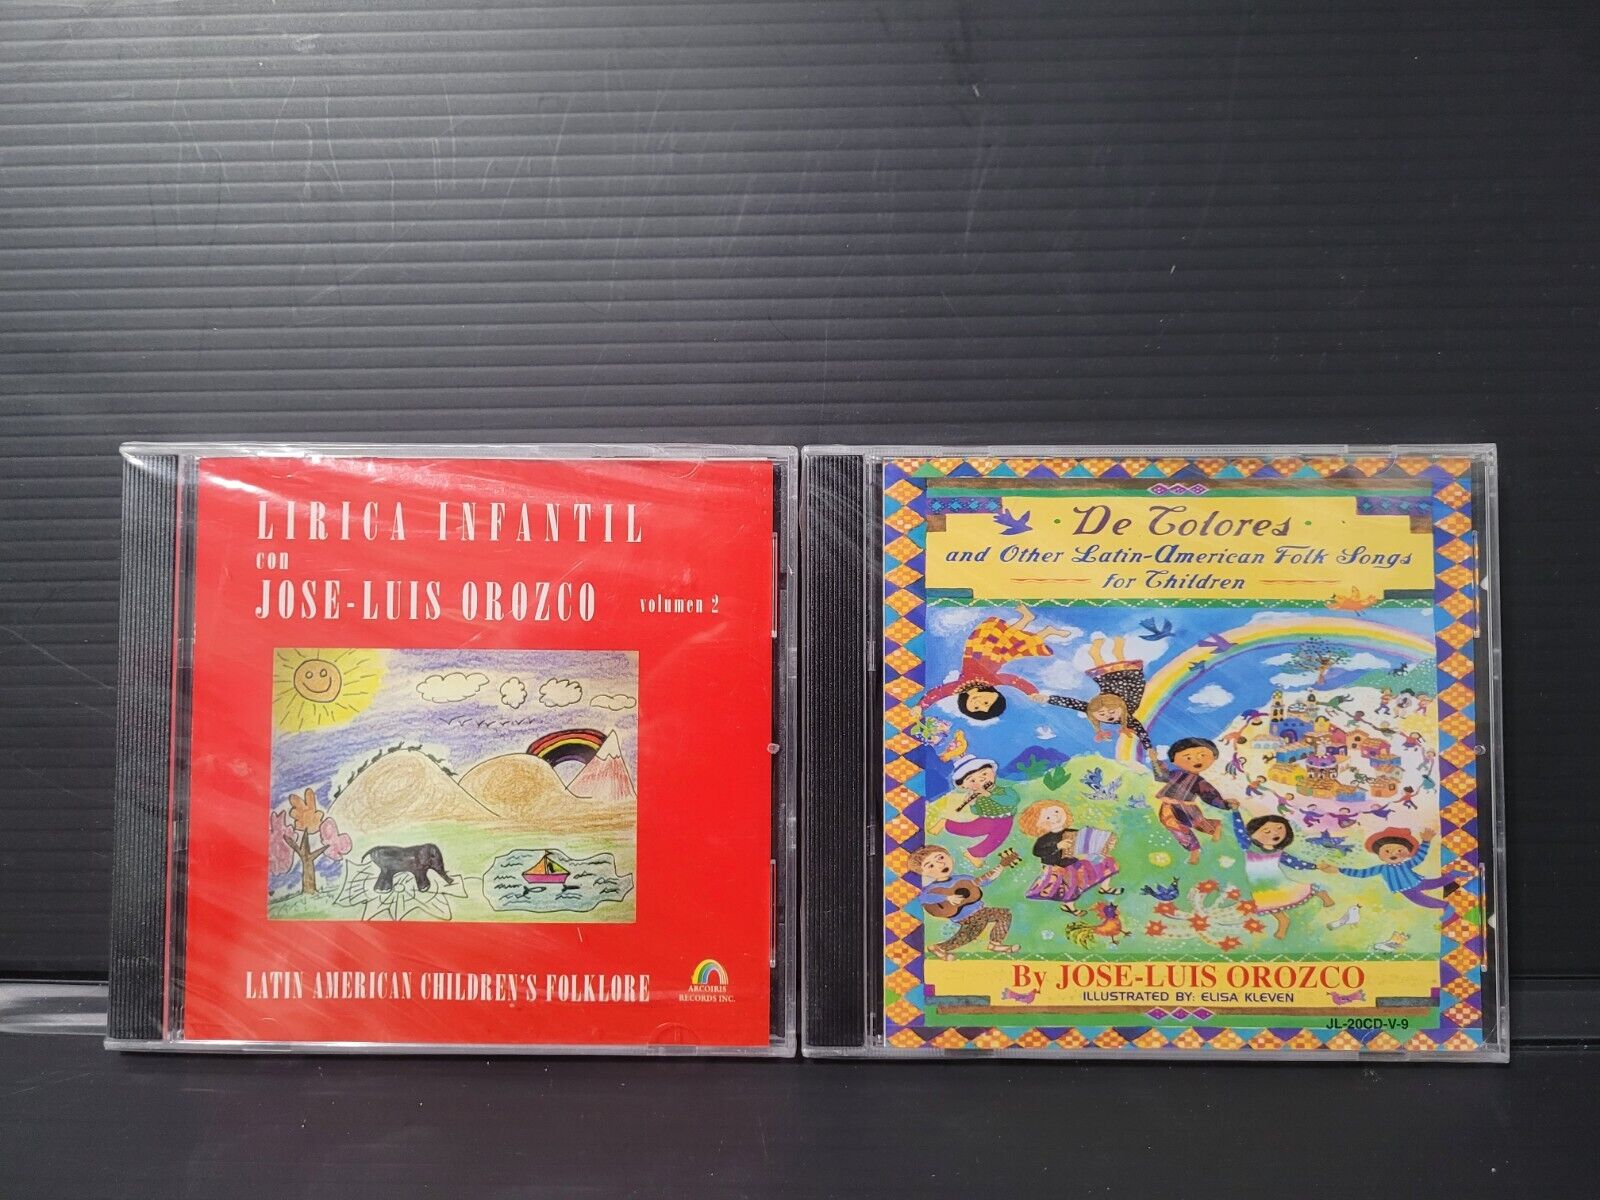 Jose-Luis Orozco 8 CDs bundle **NEW and SEALED** Latin America Children's Songs